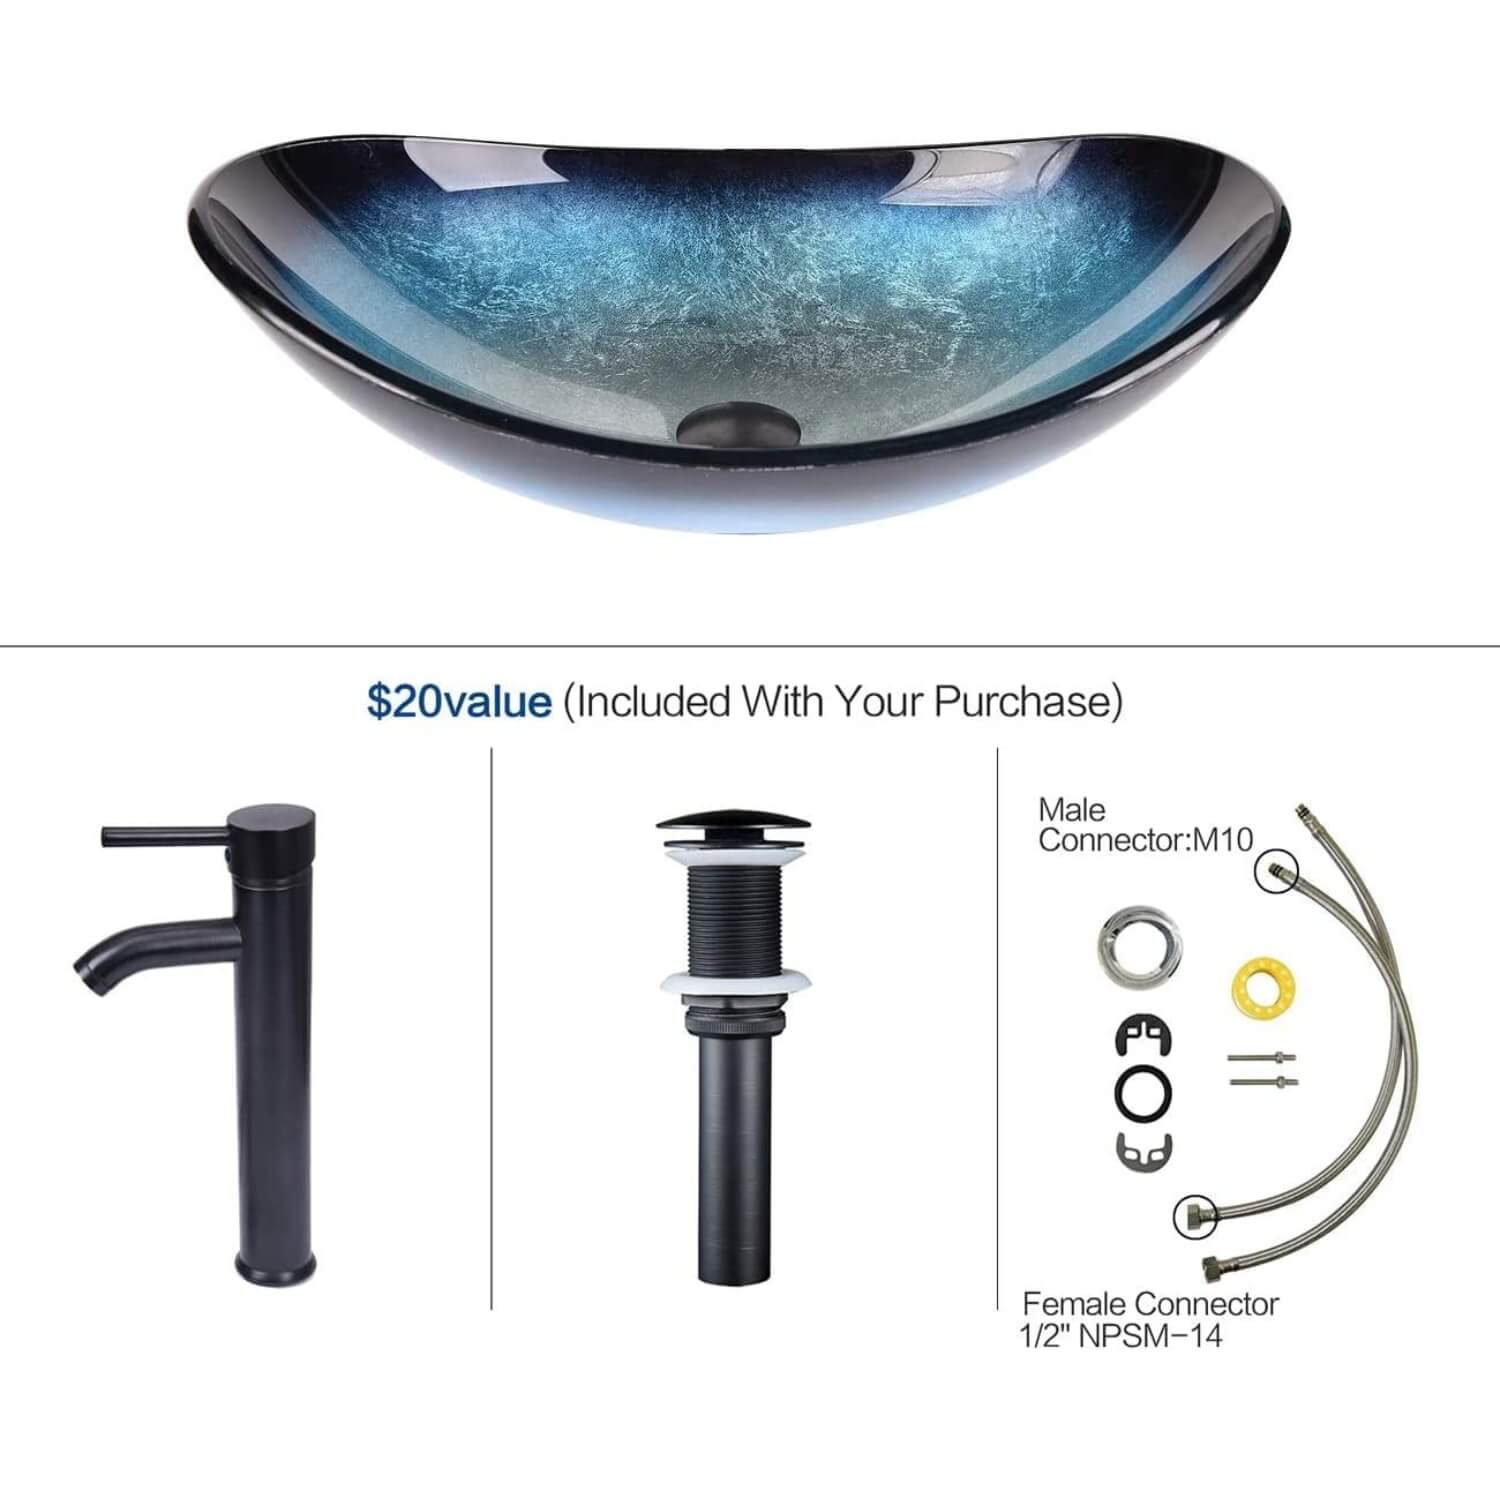 Blue Boat Vessel Sink included parts